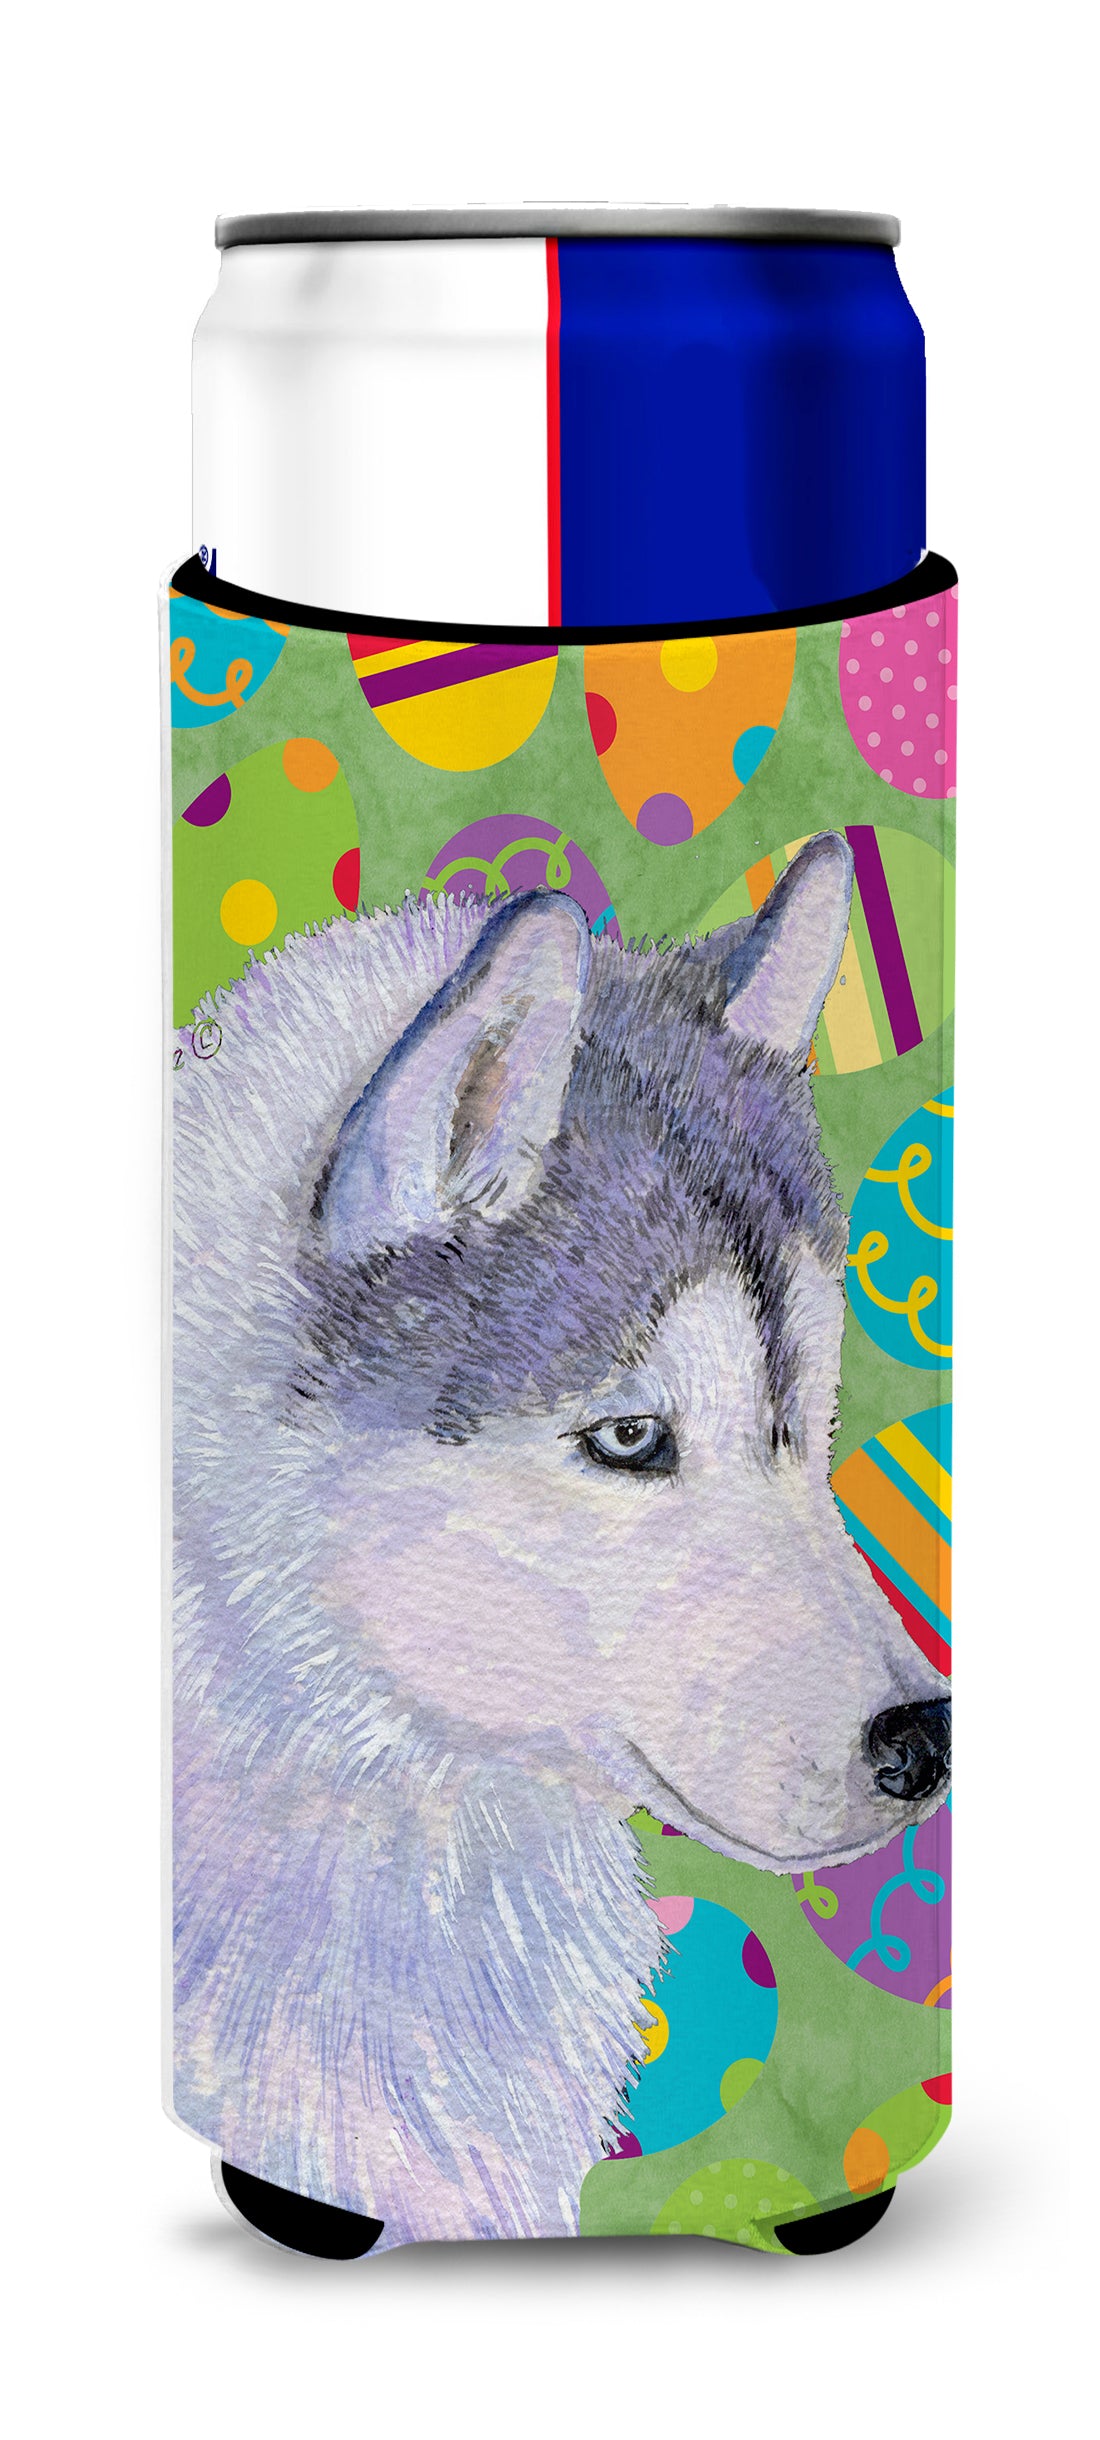 Siberian Husky Easter Eggtravaganza Ultra Beverage Insulators for slim cans SS4809MUK.